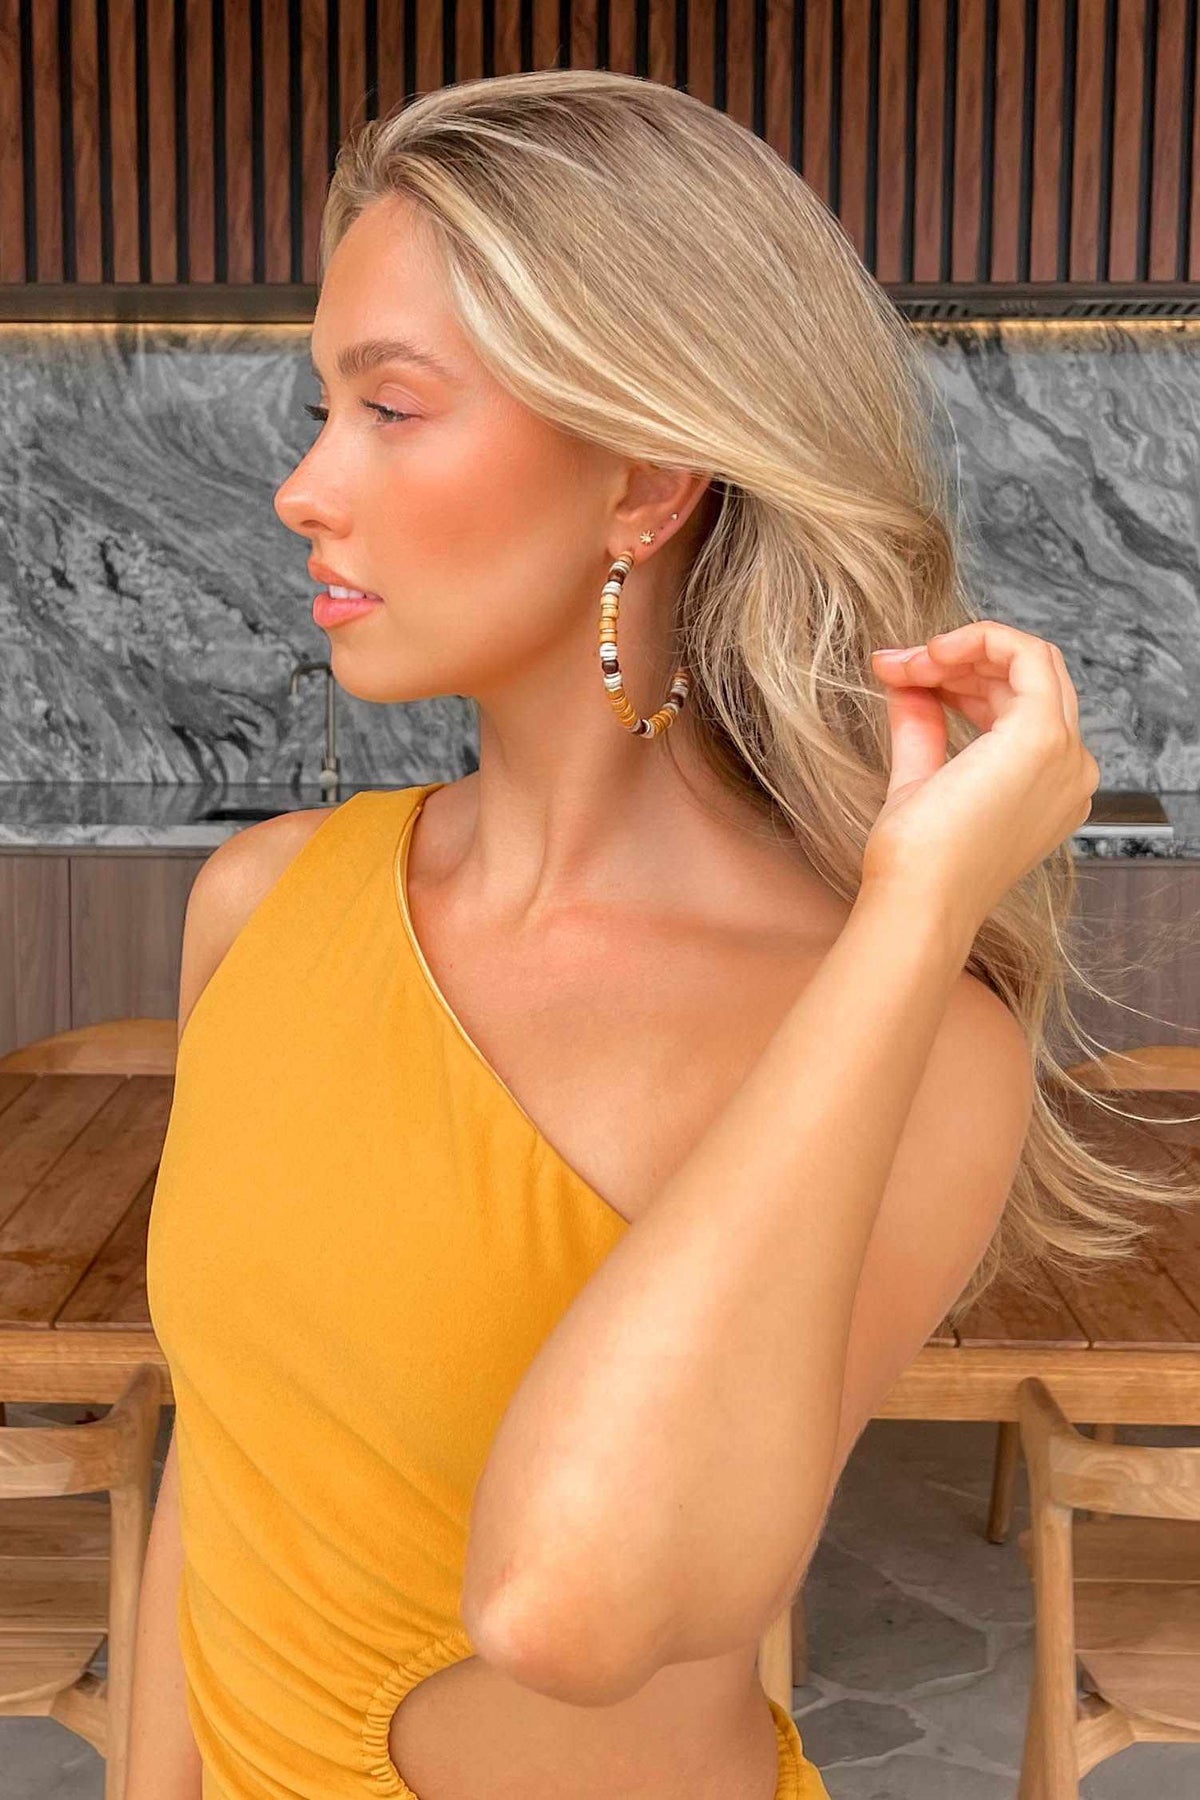 Katey Earrings, ACCESSORIES, EARRINGS, JEWELLERY, NEW ARRIVALS, Our New Katey Earrings Is Now Only $33.00 Exclusive At Mishkah, We Have The Latest Fashion Accessories @ Mishkah Online Fashion Boutique Our New Katey Earrings is now only $33.00-MISHKAH